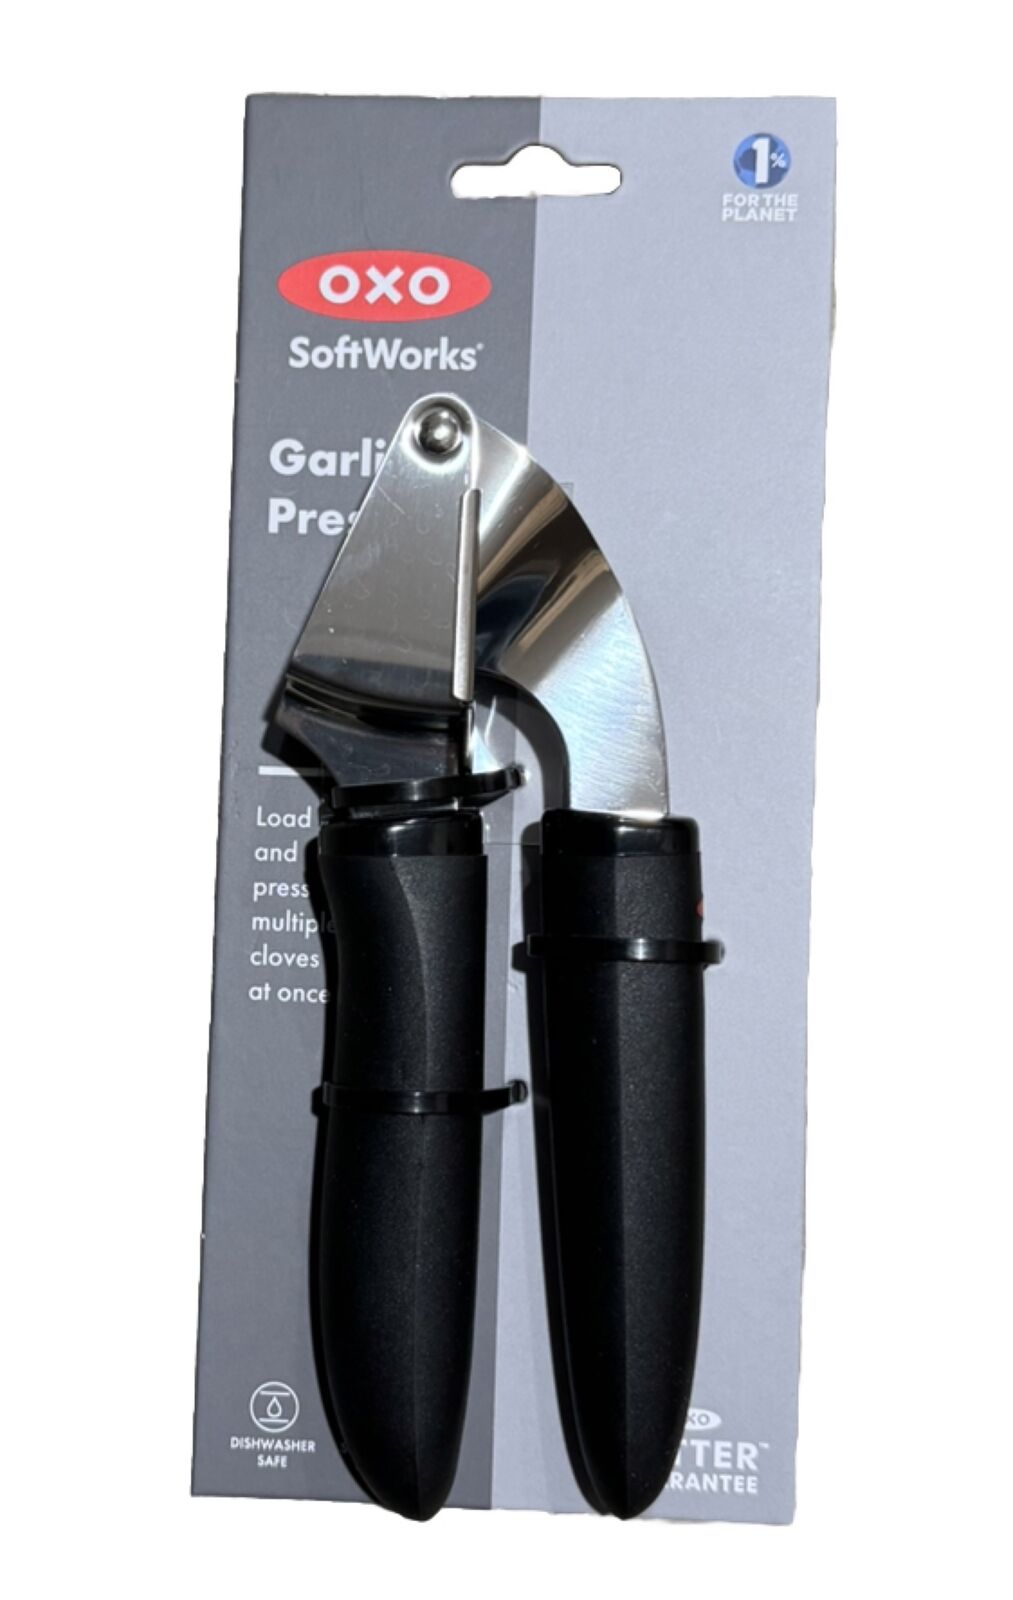 OXO SoftWorks Soft-Handled Garlic Press Stainless Steel New Large Capacity